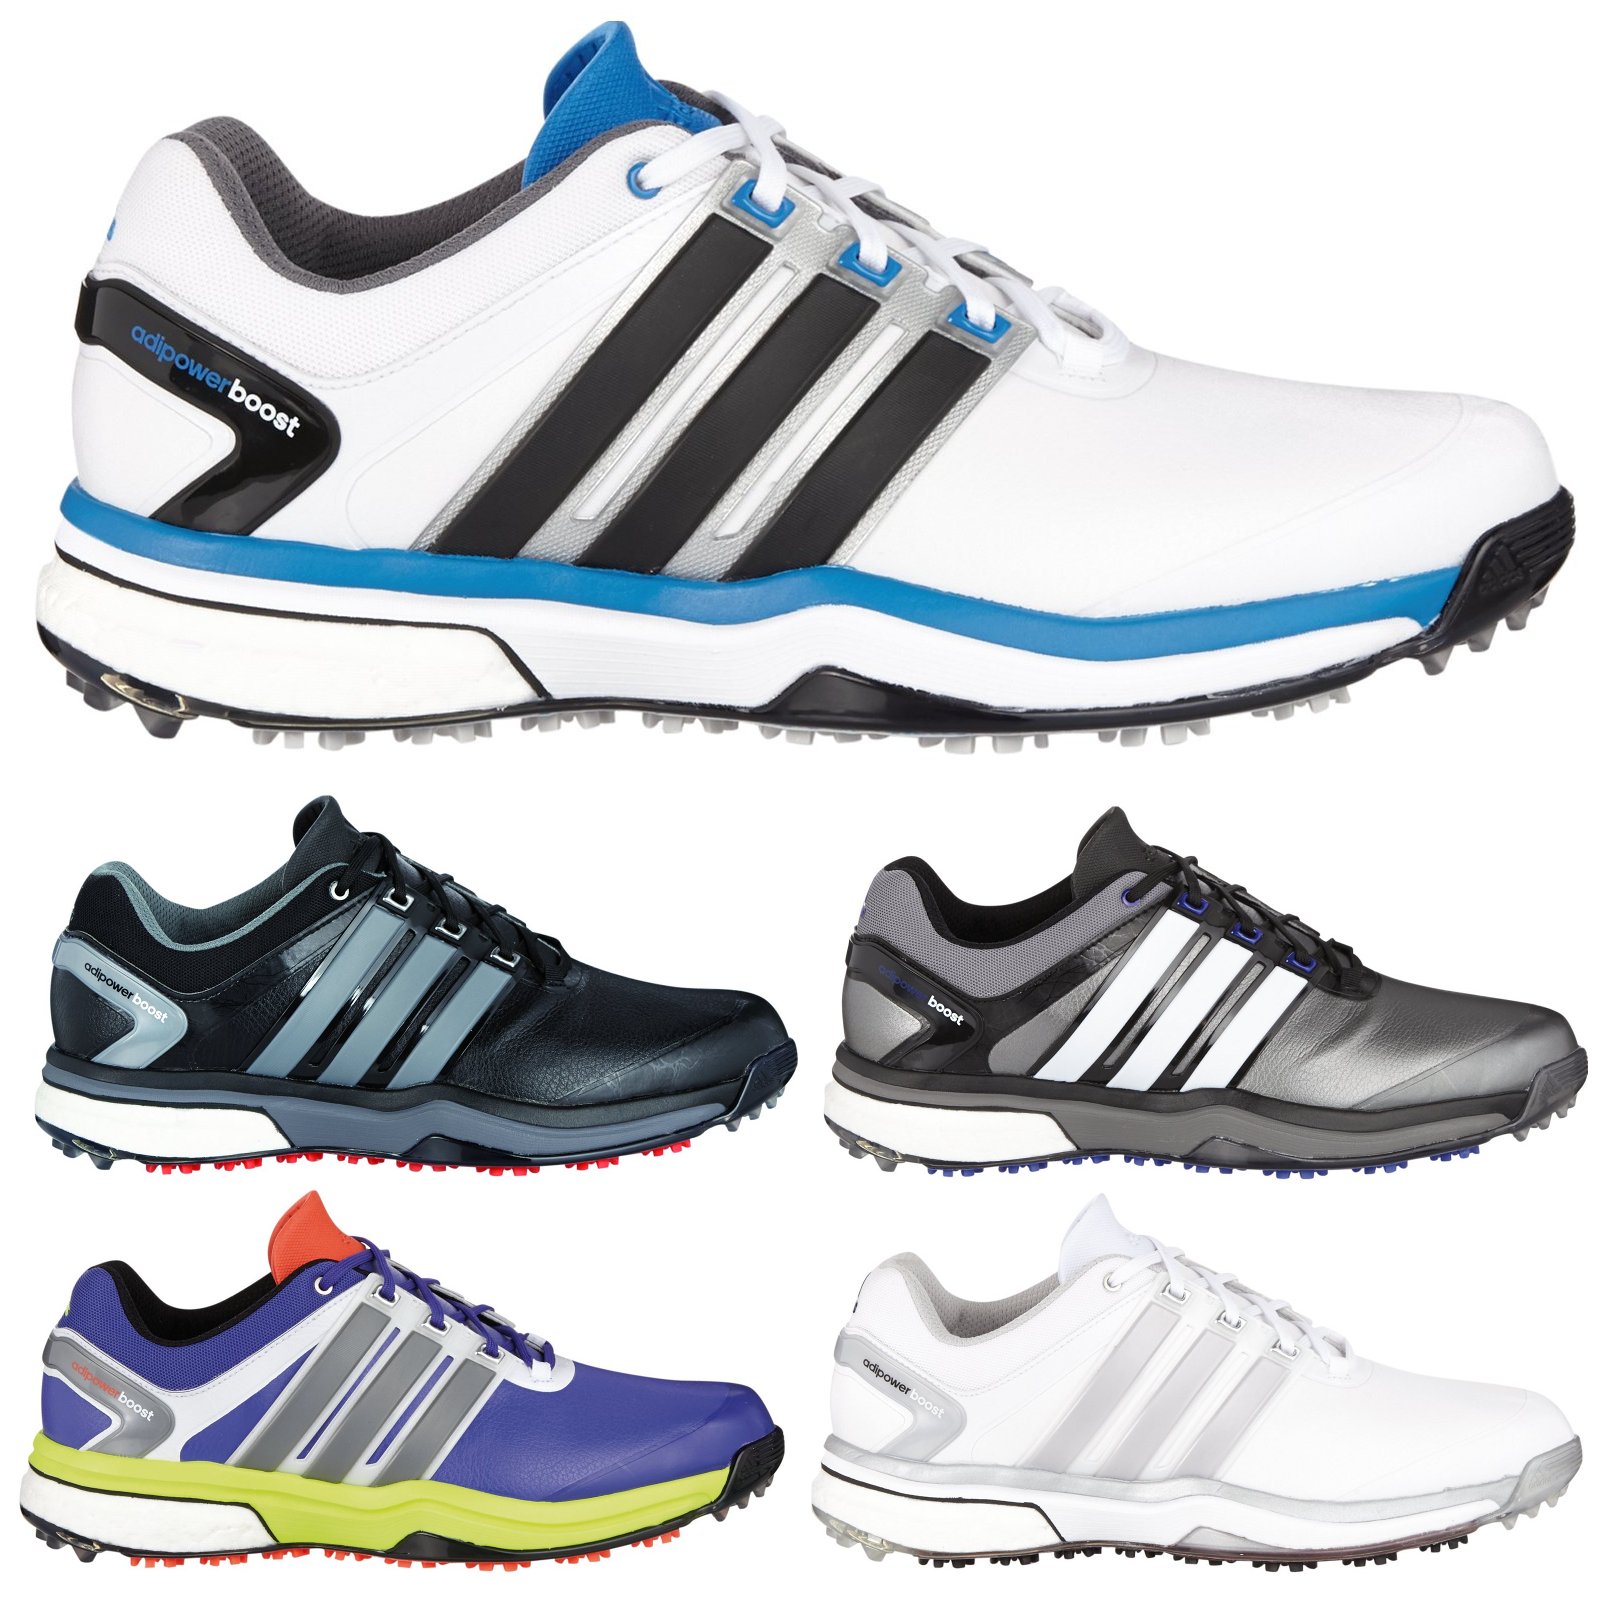 boost golf shoes